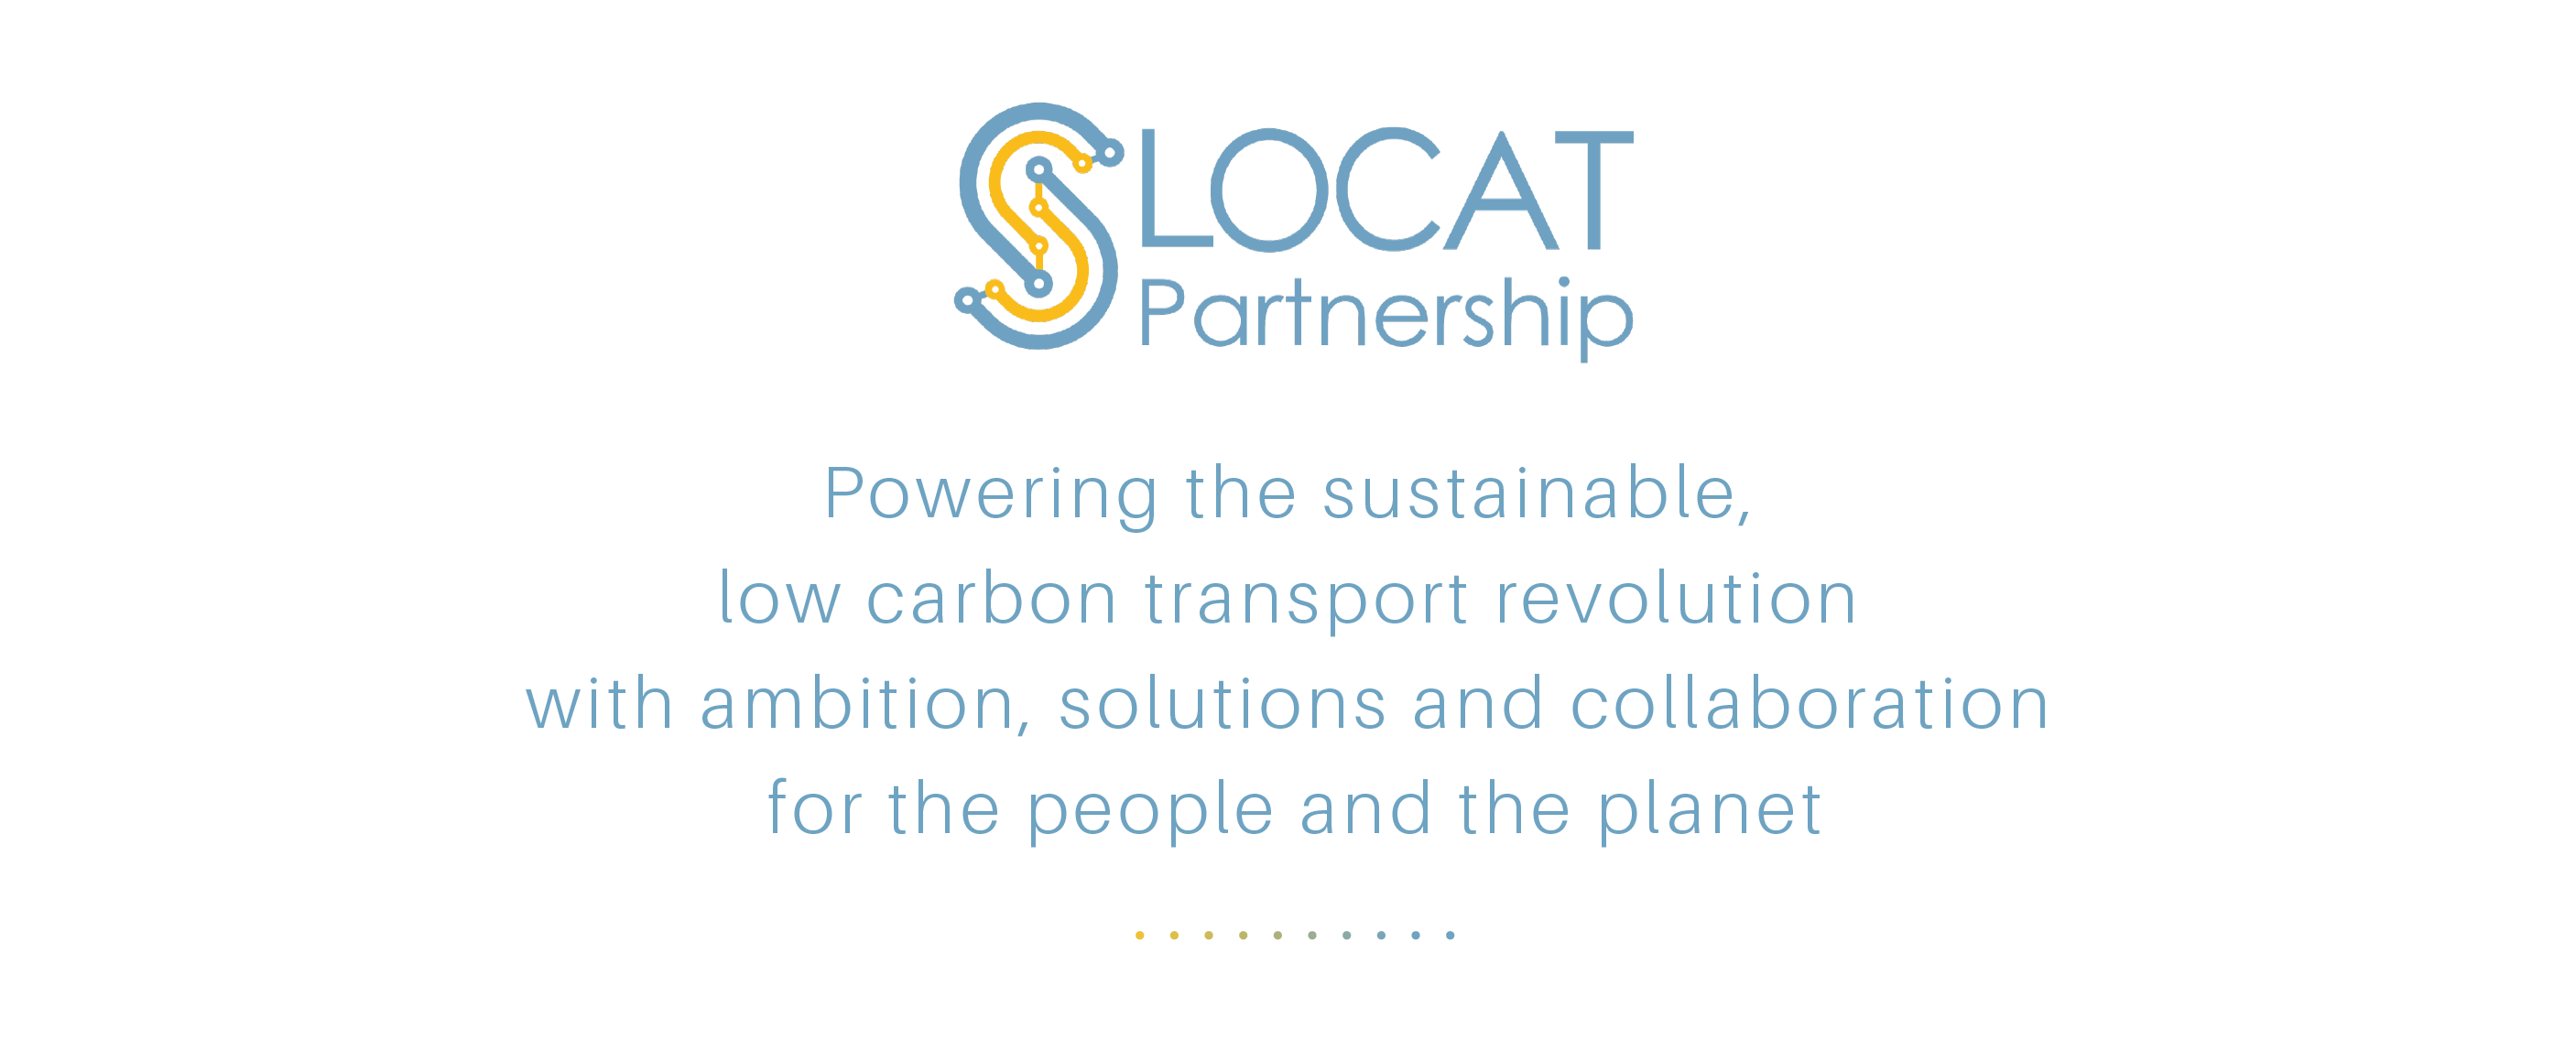 Powering the sustainable, low carbon transport revolution with ambition, solutions and collaboration for the people and the planet